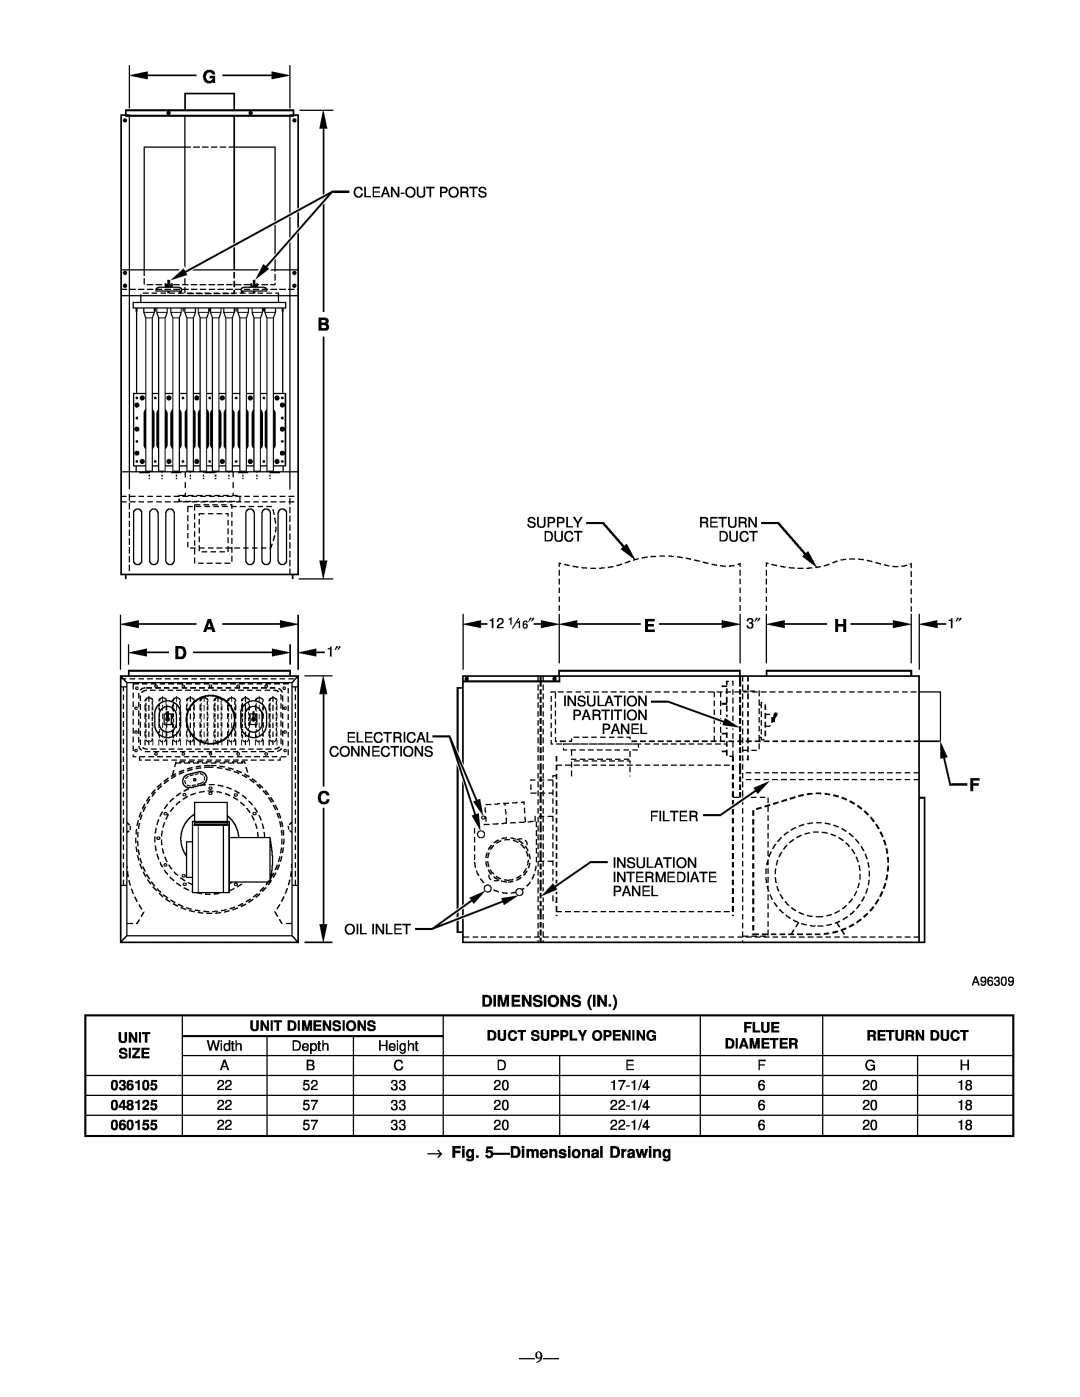 Bryant 362AAN Dimensions In, → ÐDimensional Drawing, Unit Dimensions, Duct Supply Opening, Flue, Return Duct, Diameter 